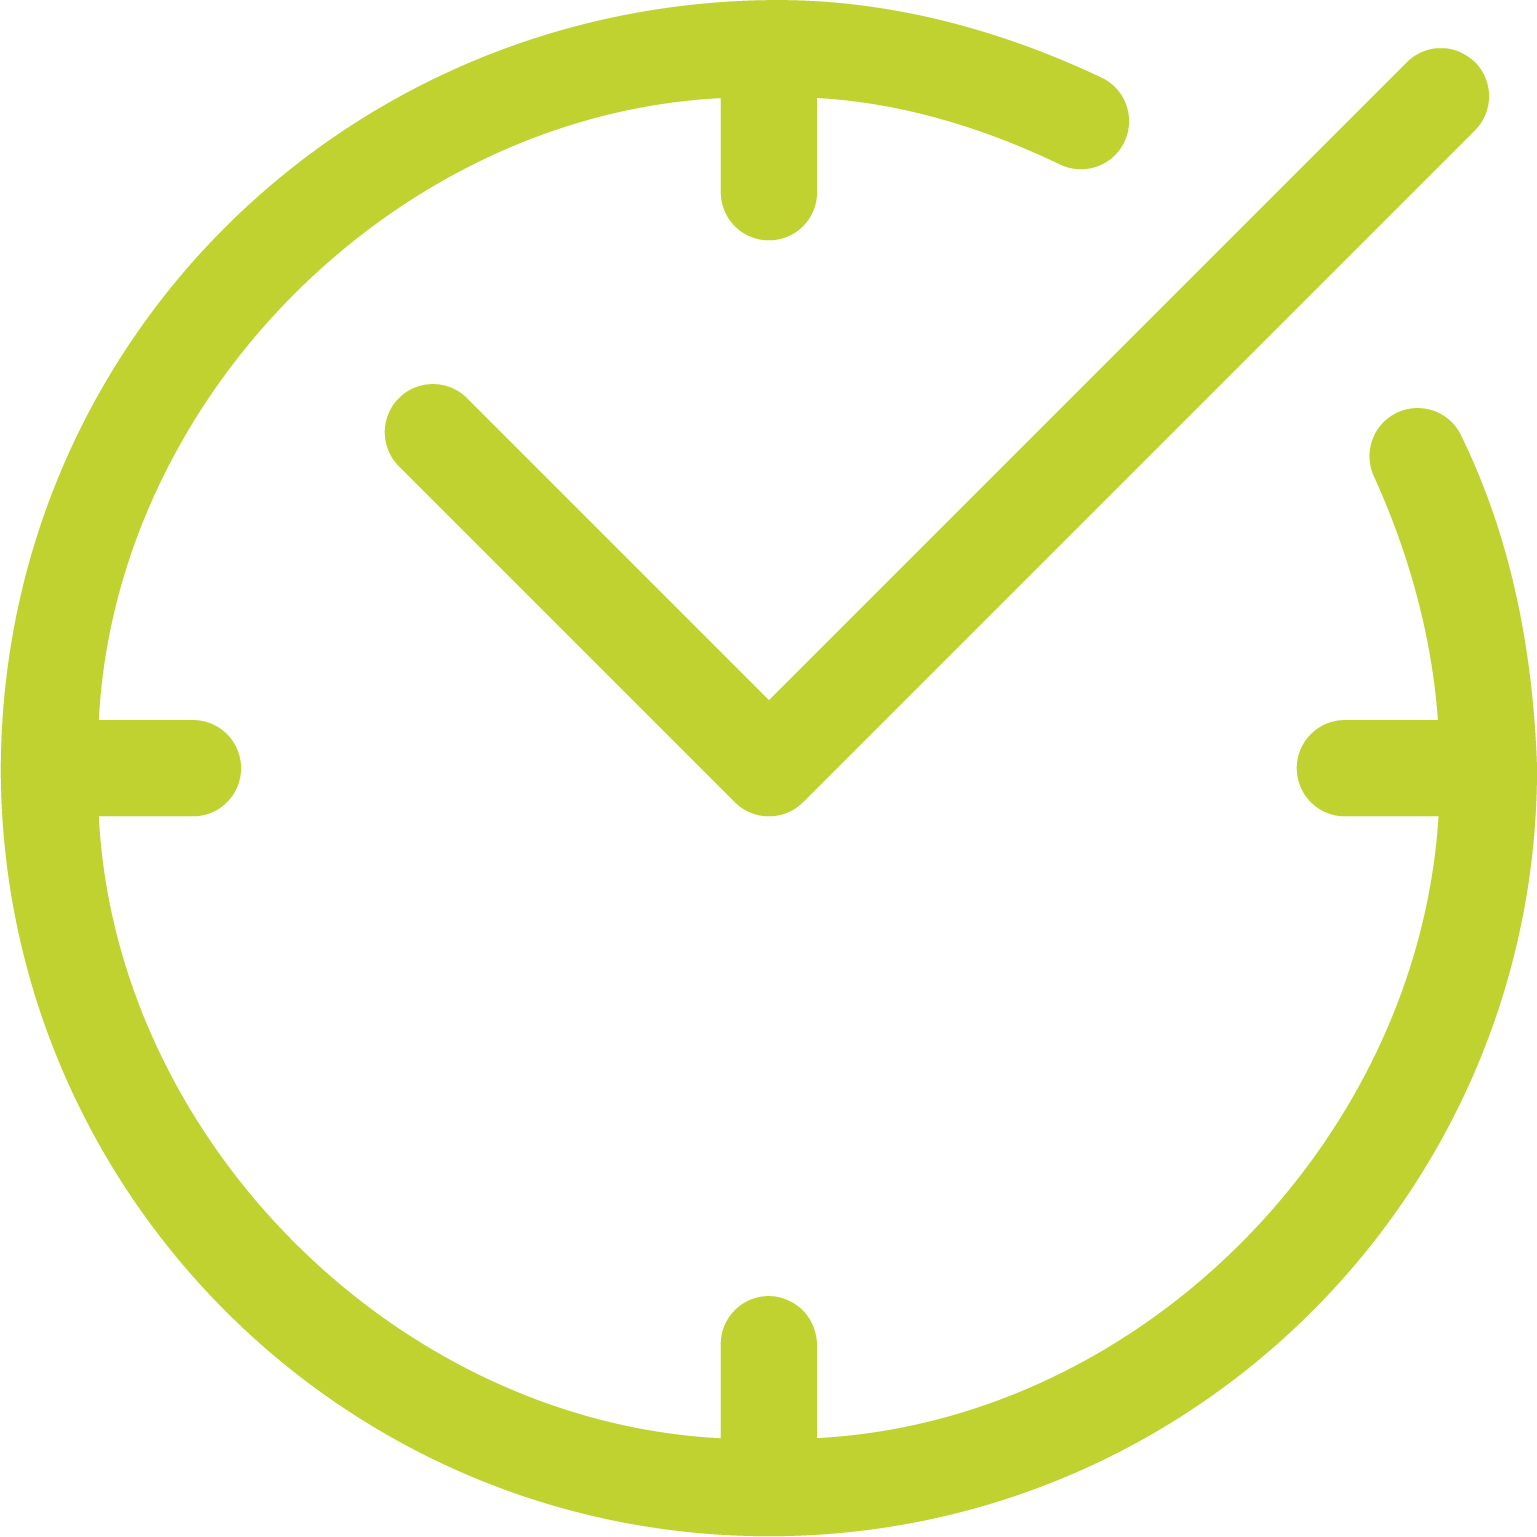 Green line drawing of a clock with a tick in the middle